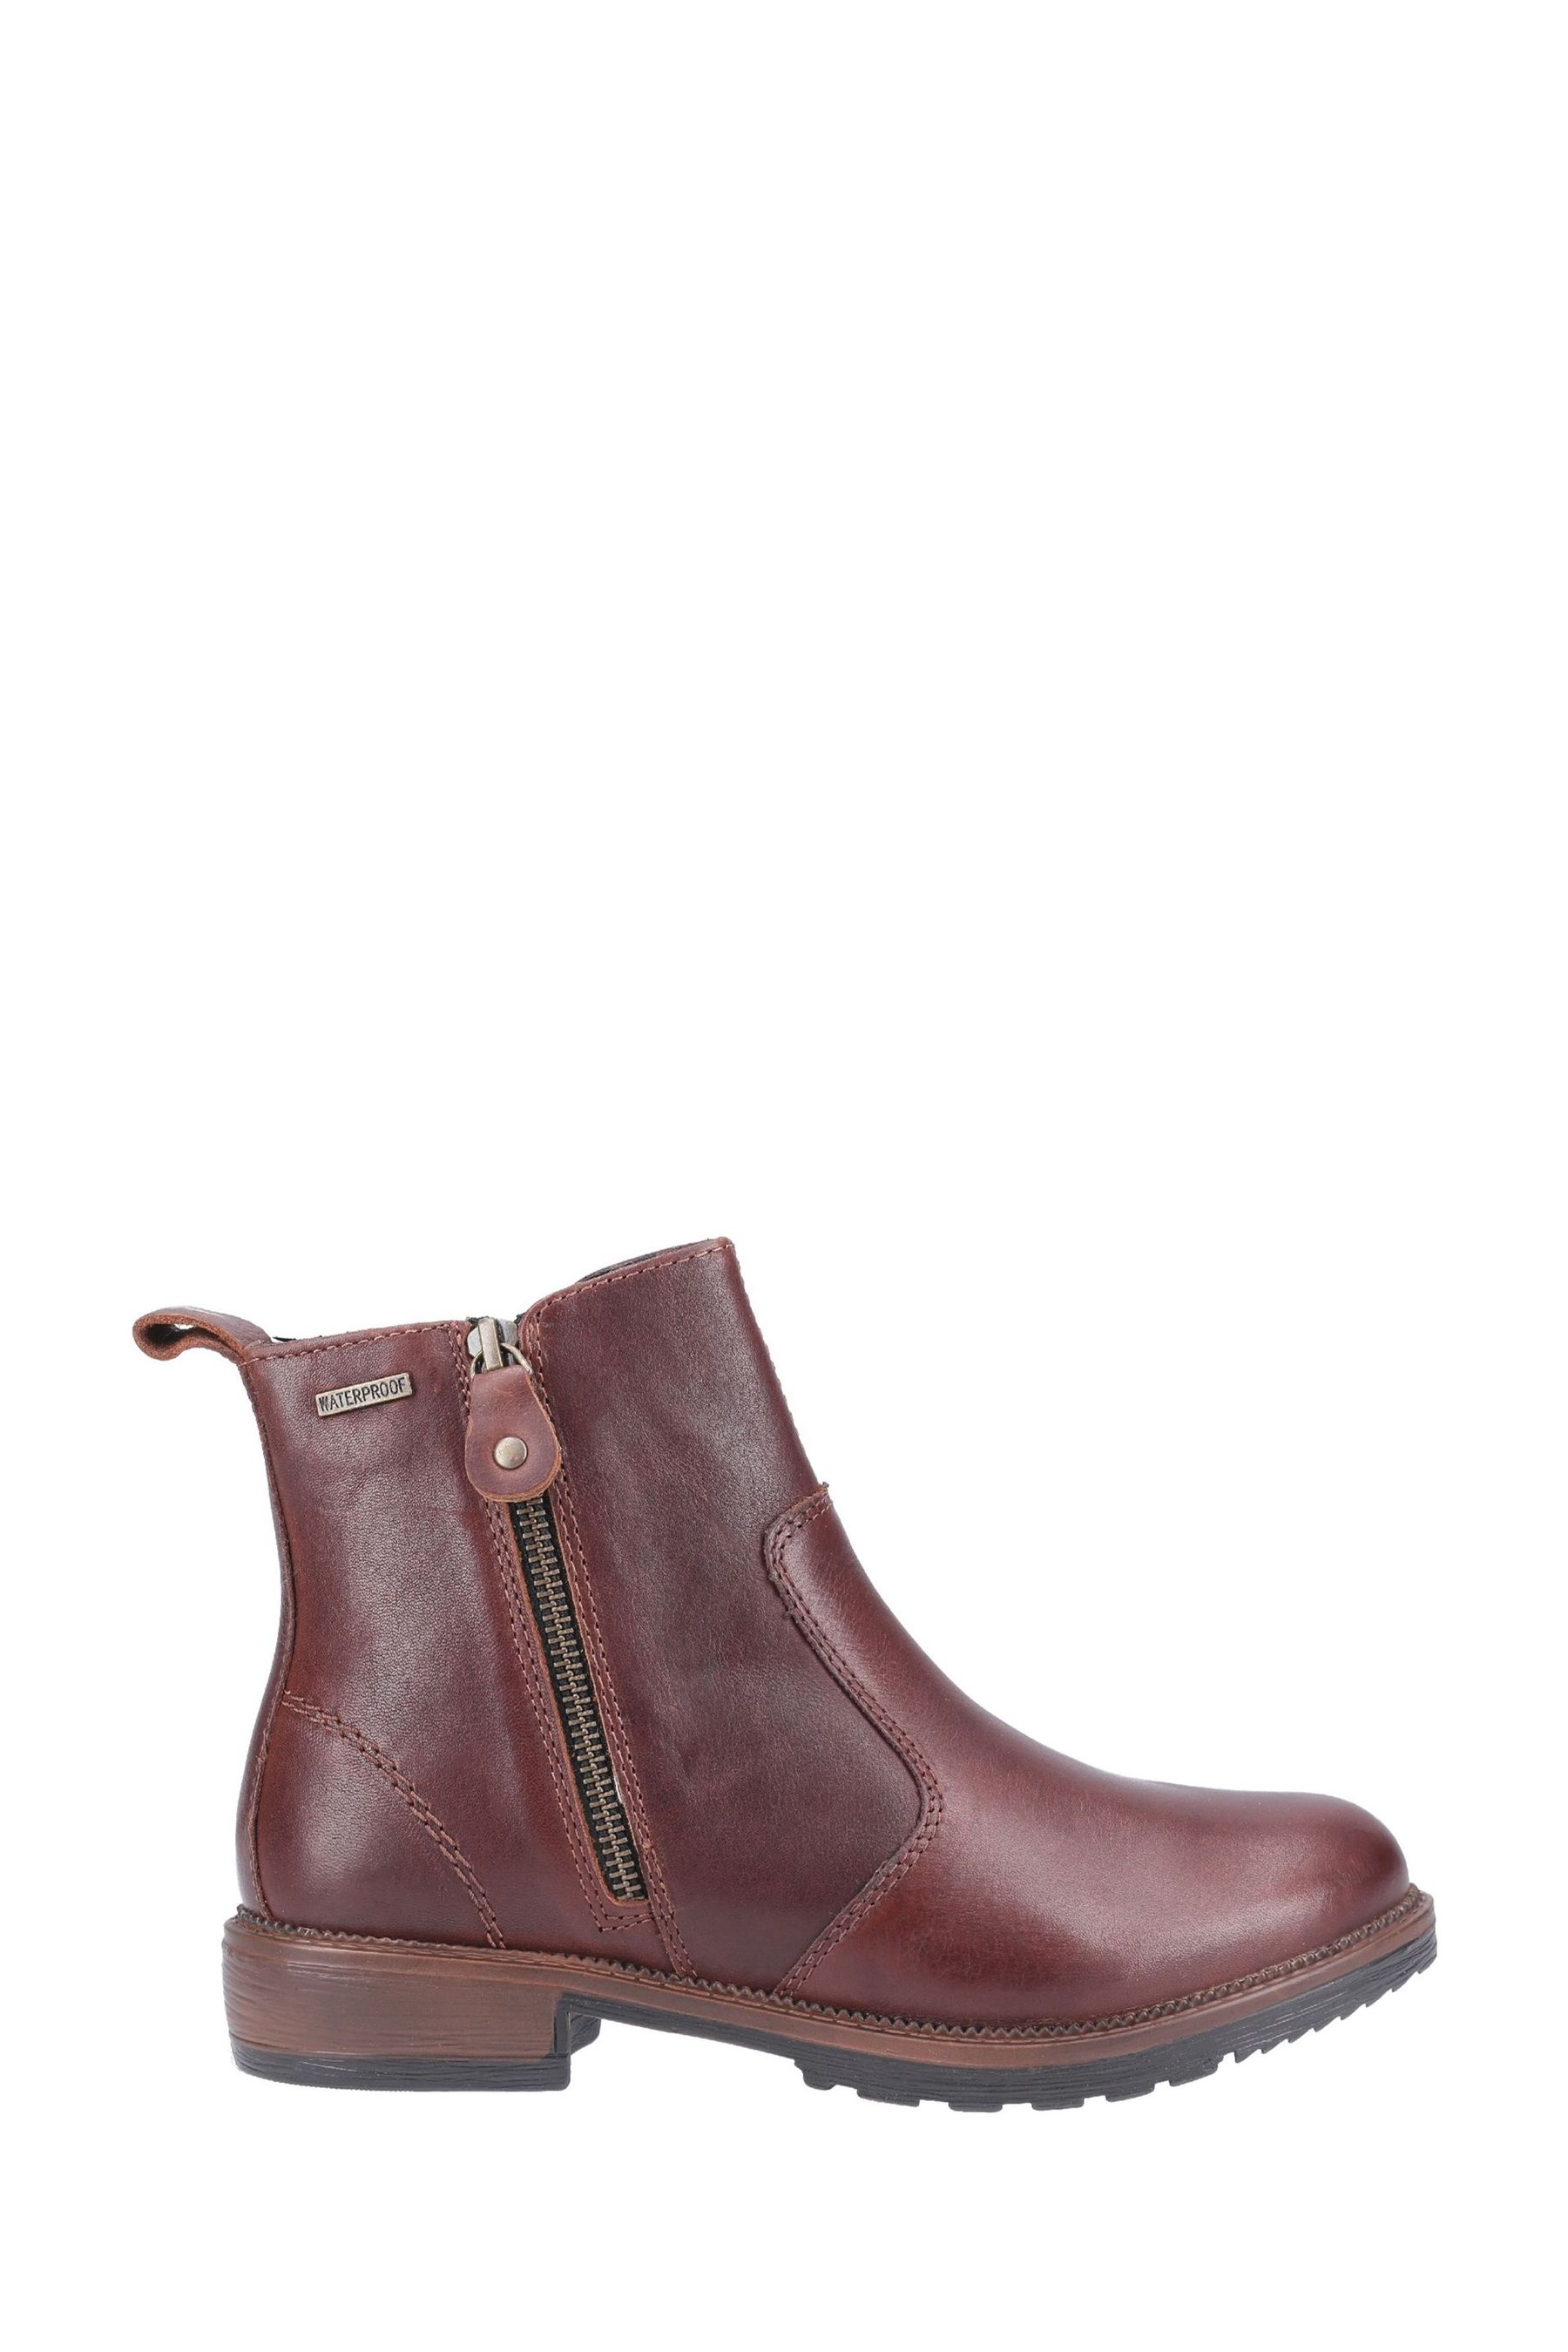 Buy Cotswold Brown Ashwicke Zip Ankle Boots from the Next UK online shop